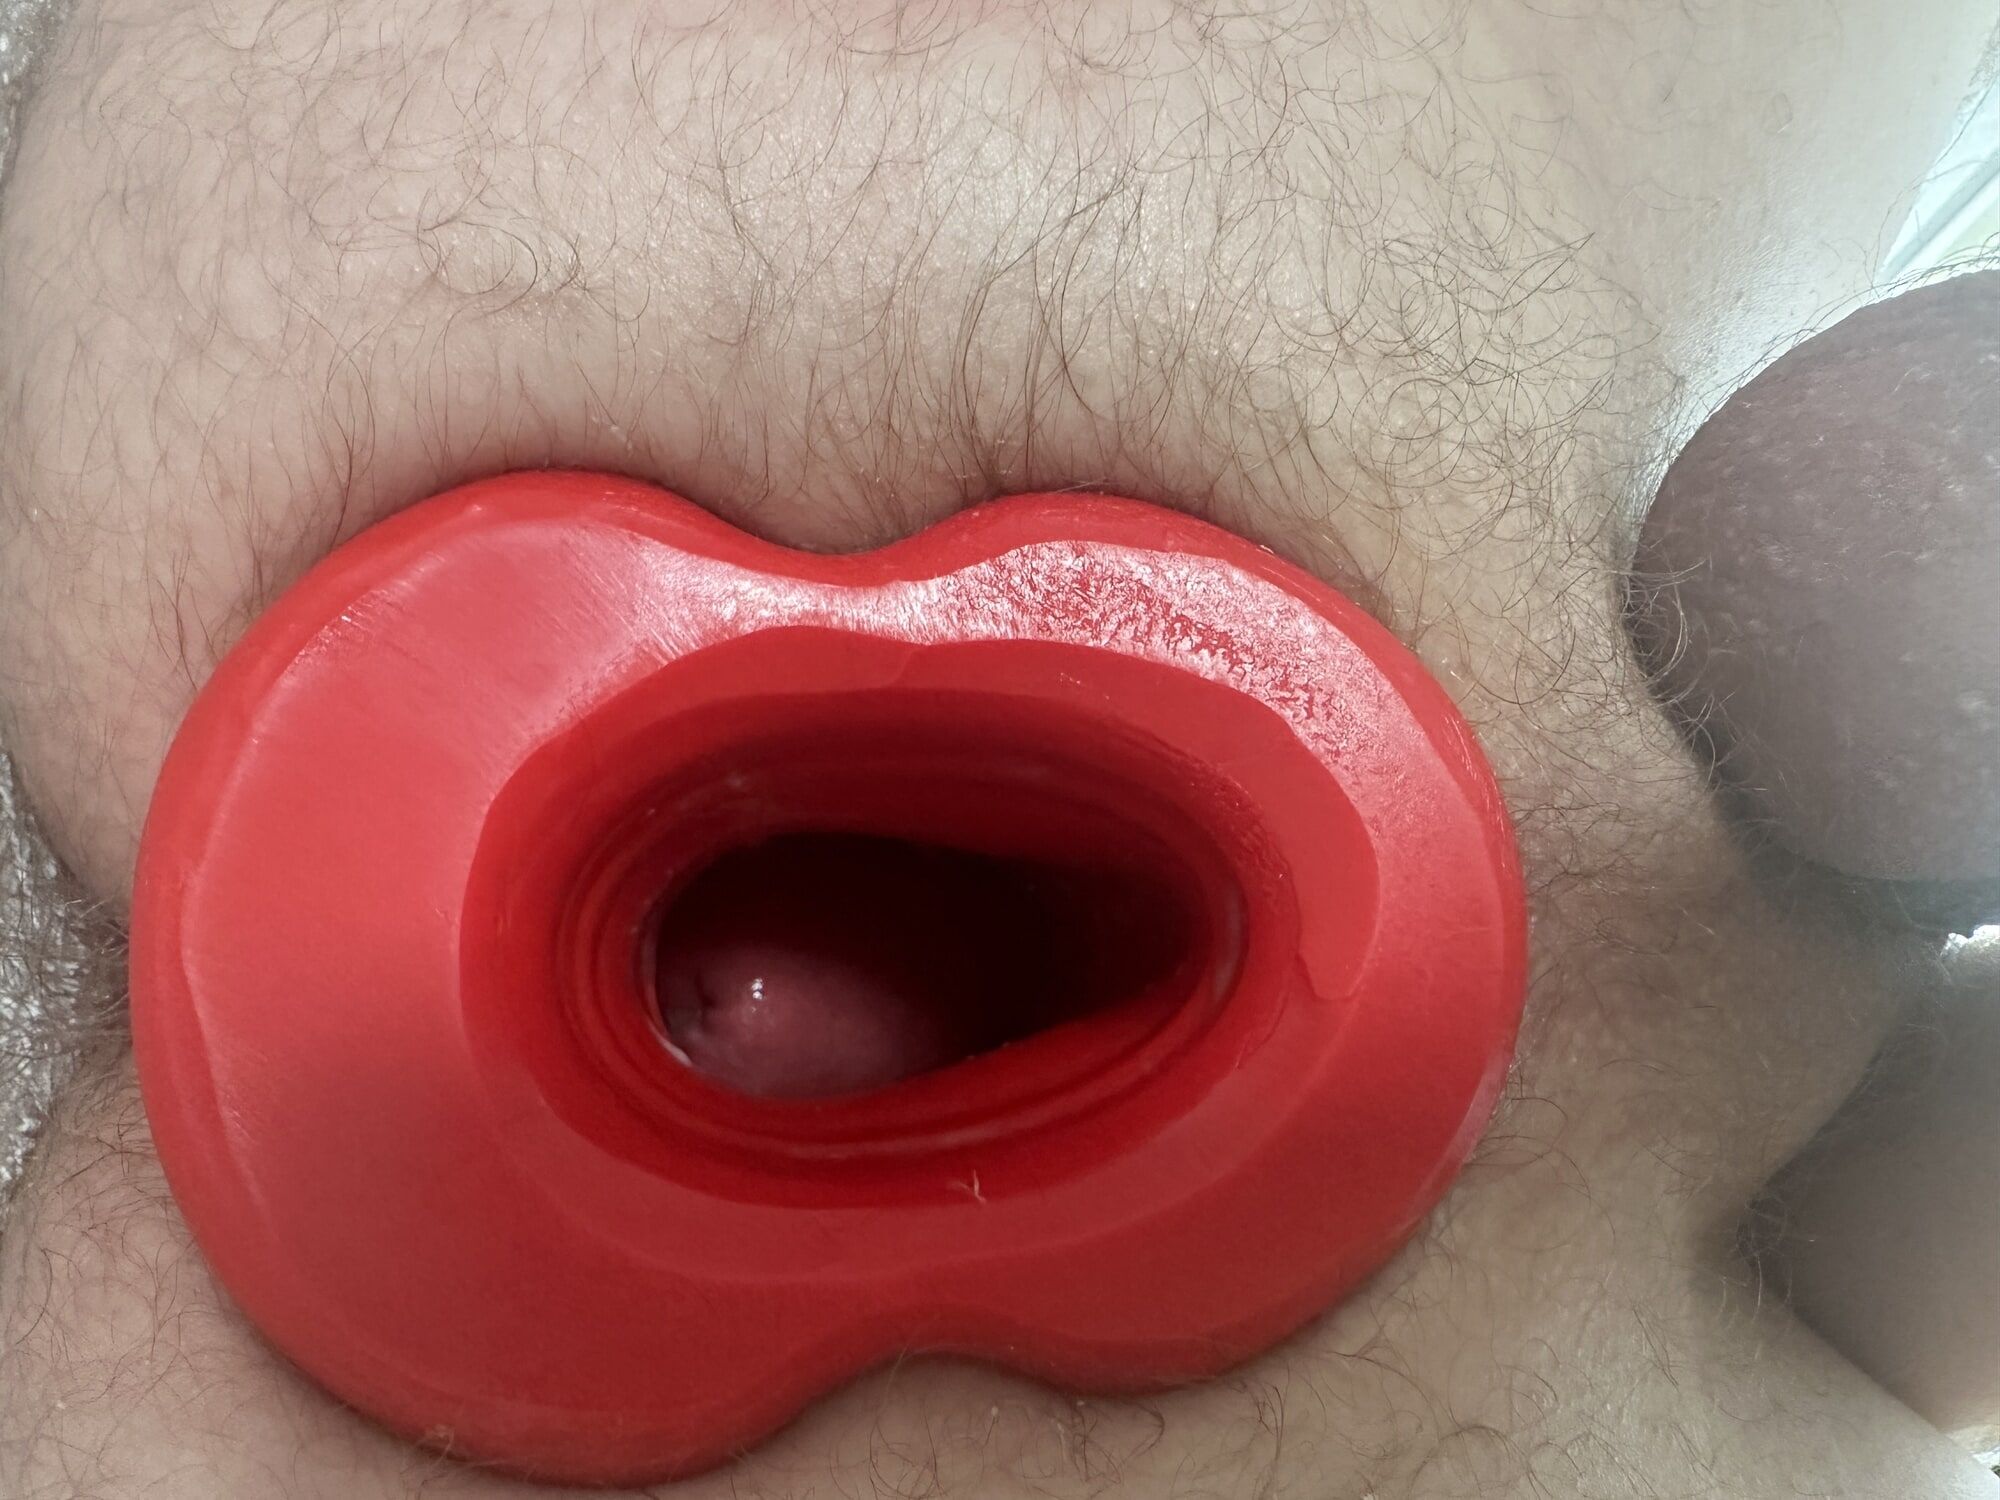 Anal prolapse in oxball ff pighole #2